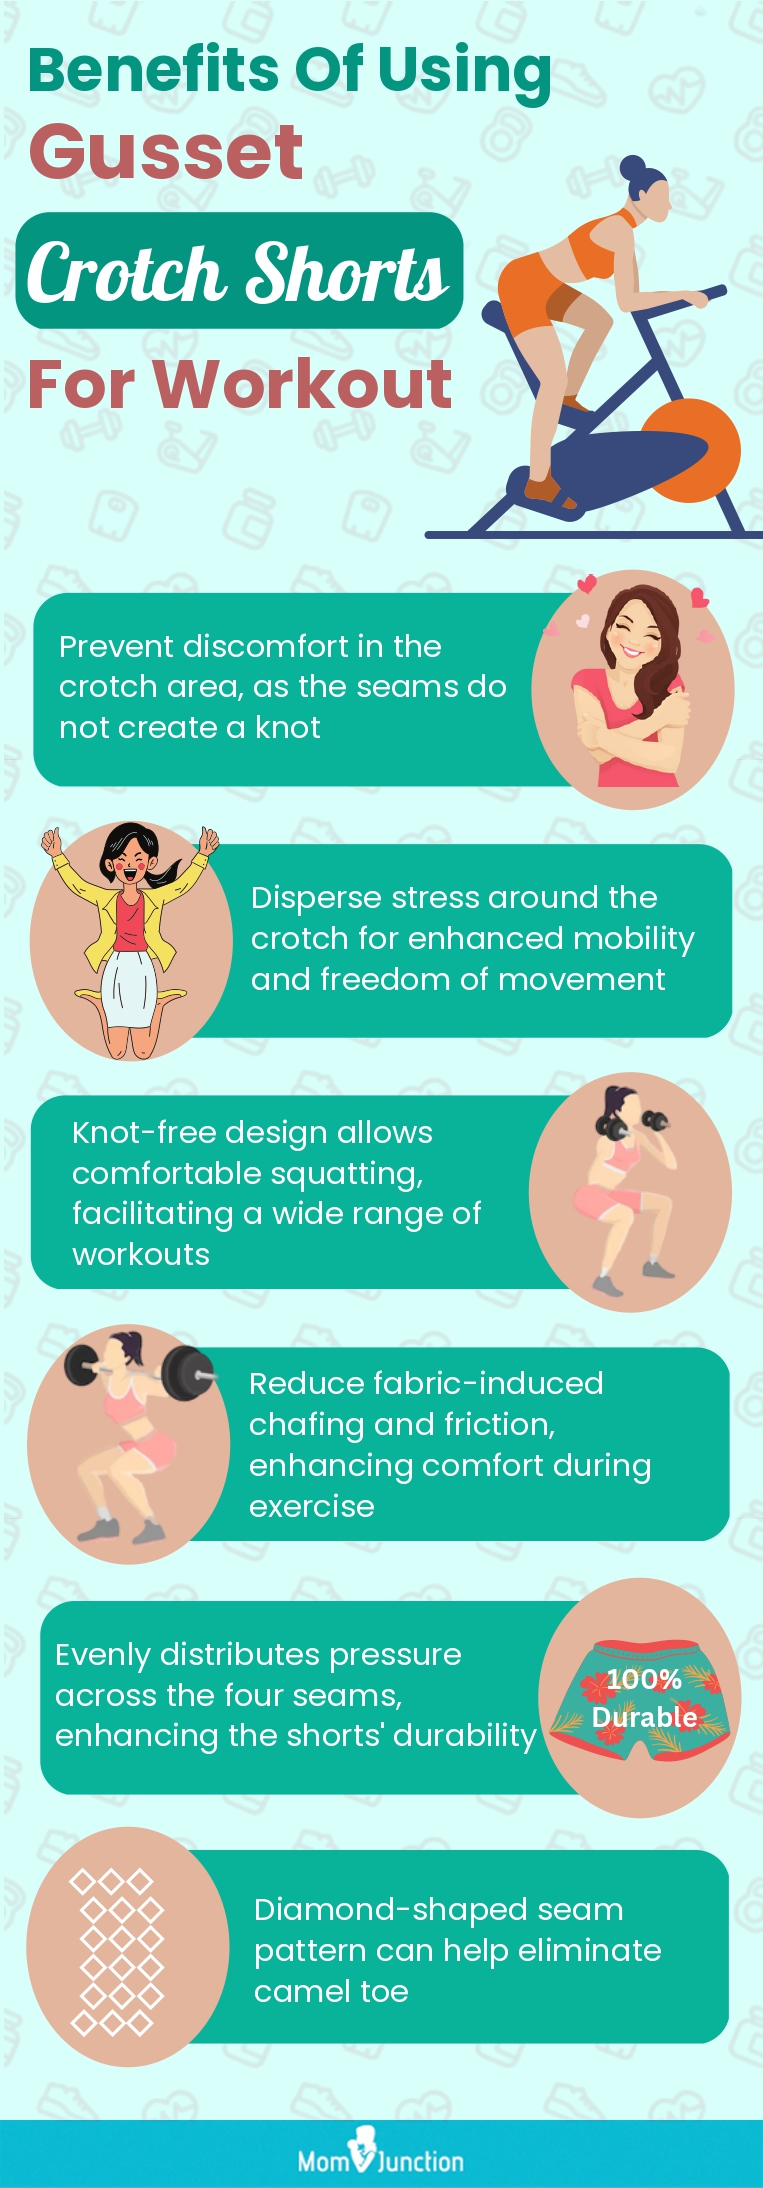 Benefits Of Using Gusset Crotch Shorts For Workout(infographic)